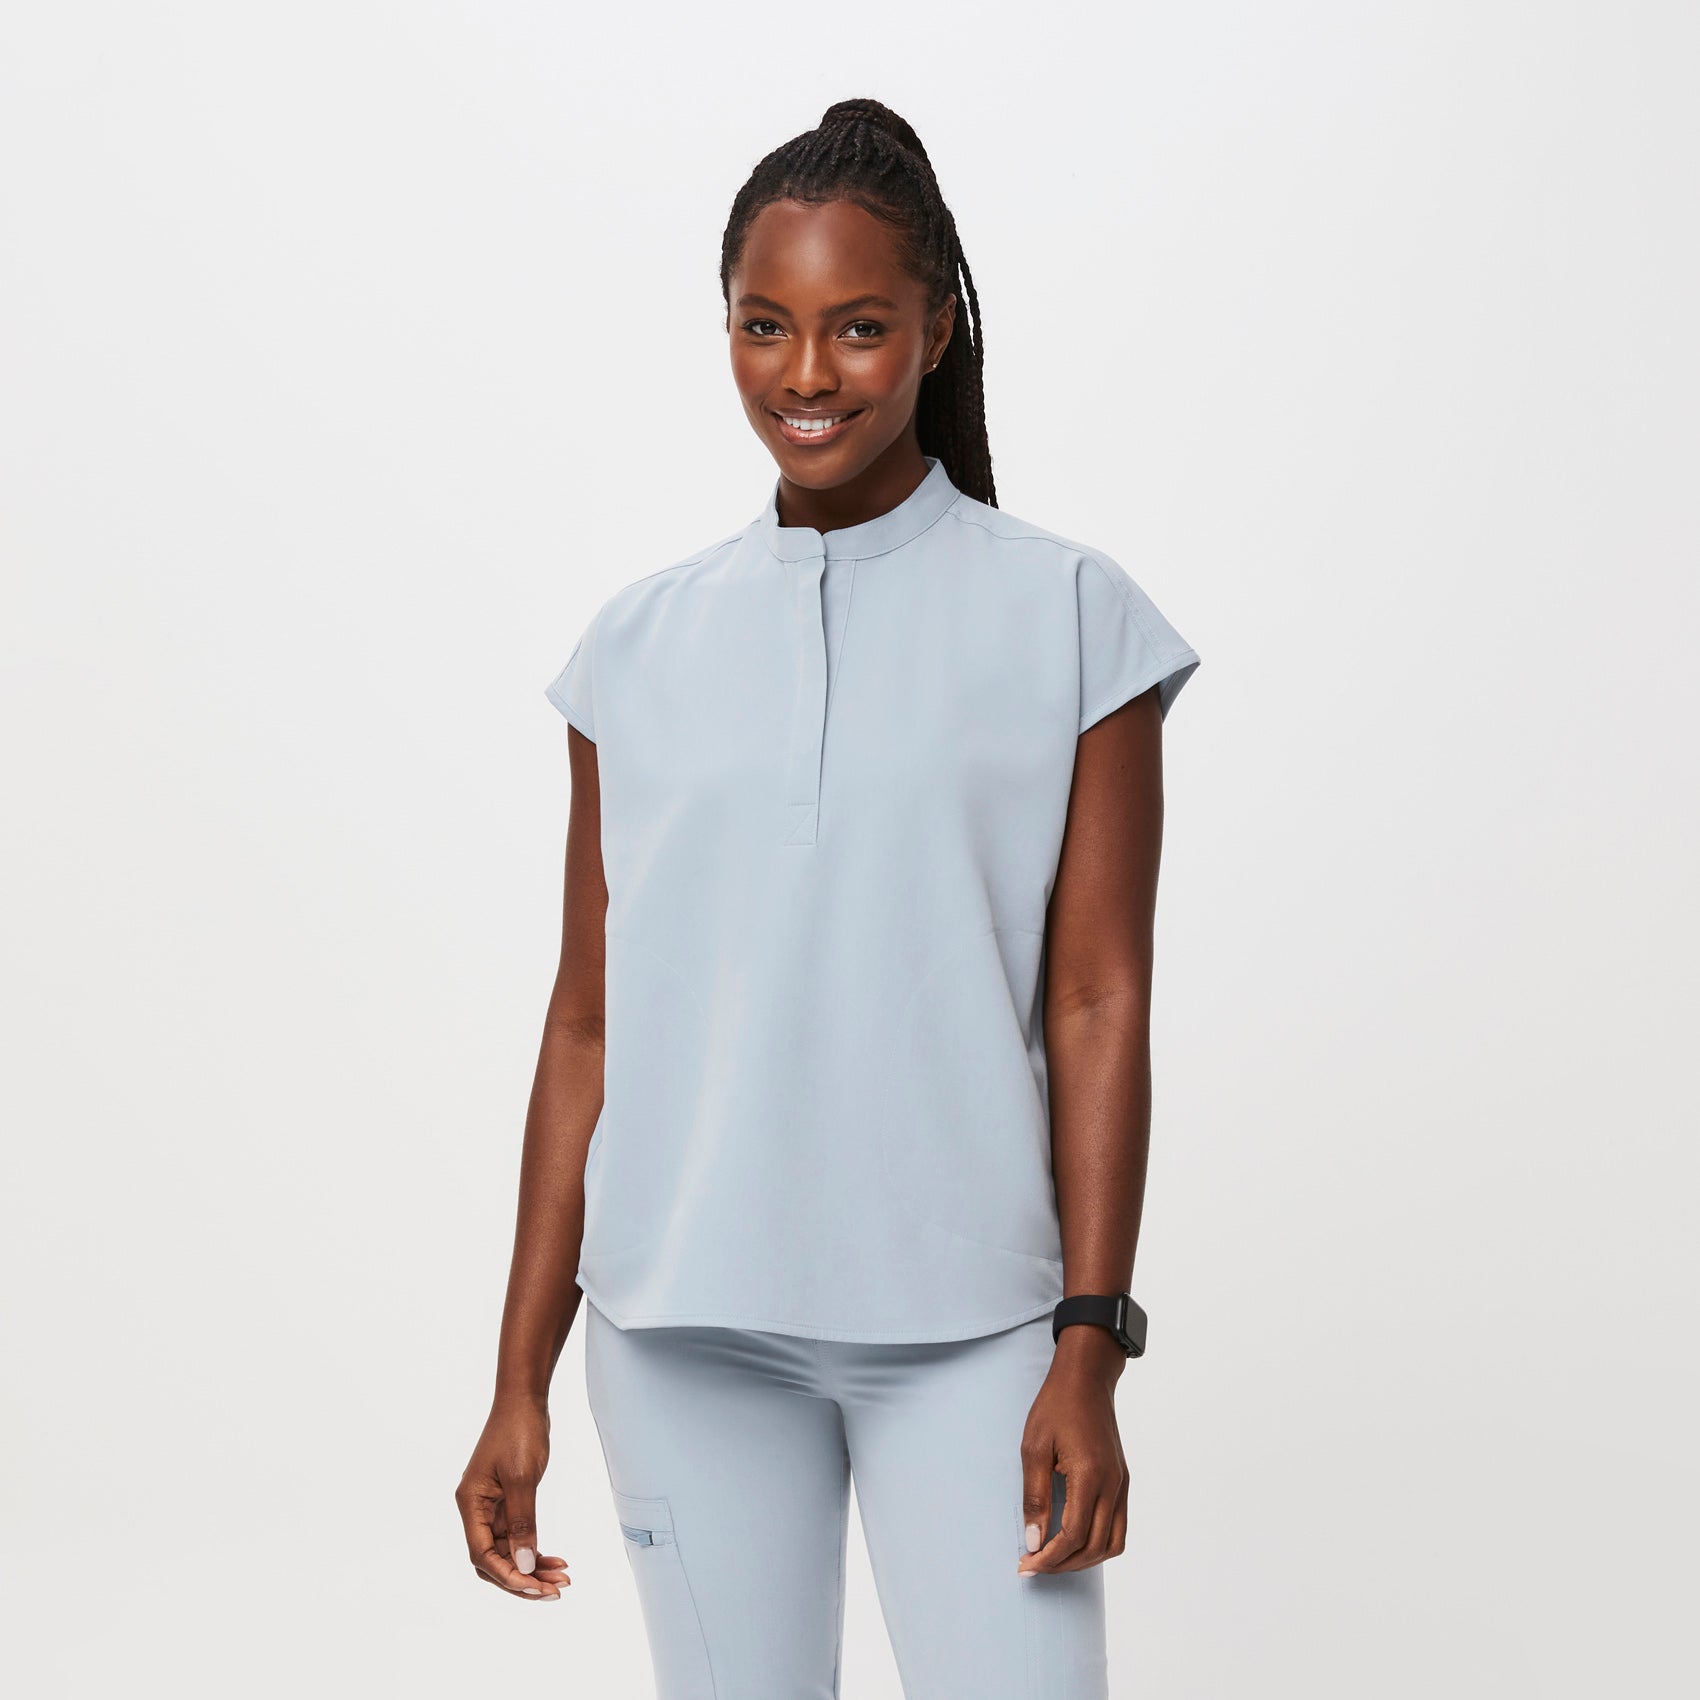 FIGS - Is it just us or do the Rafaela Scrub Top and Sarah look